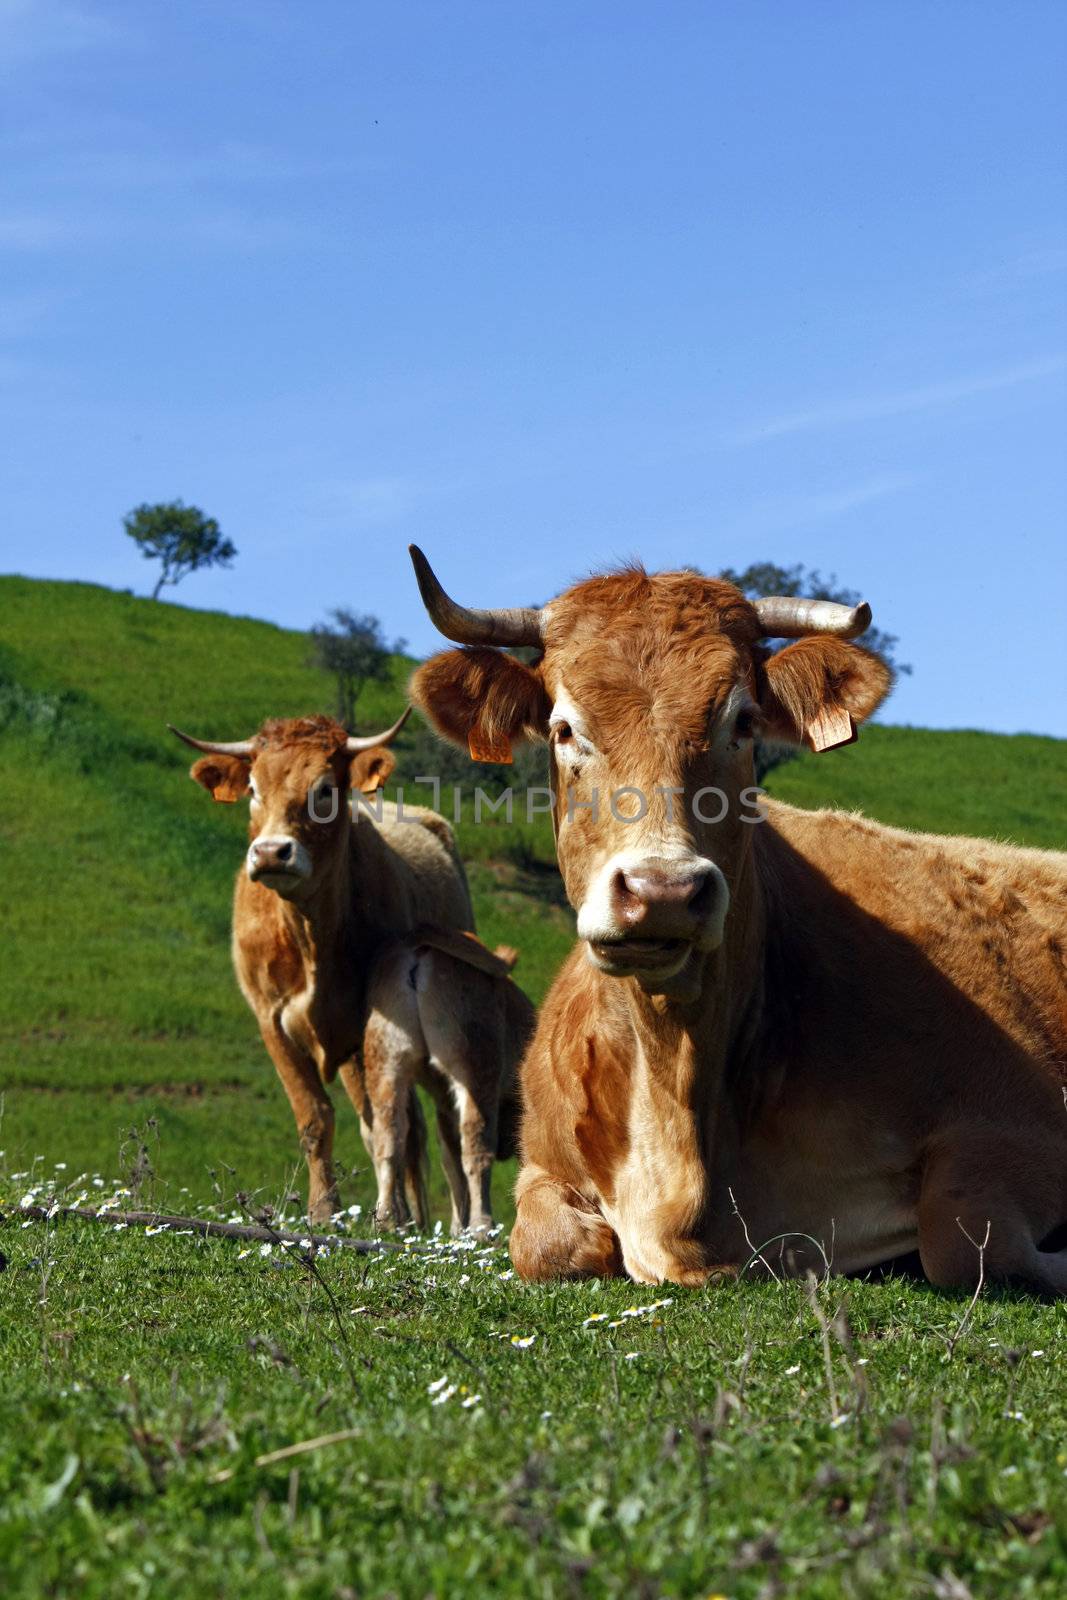 Cows on the grass by membio